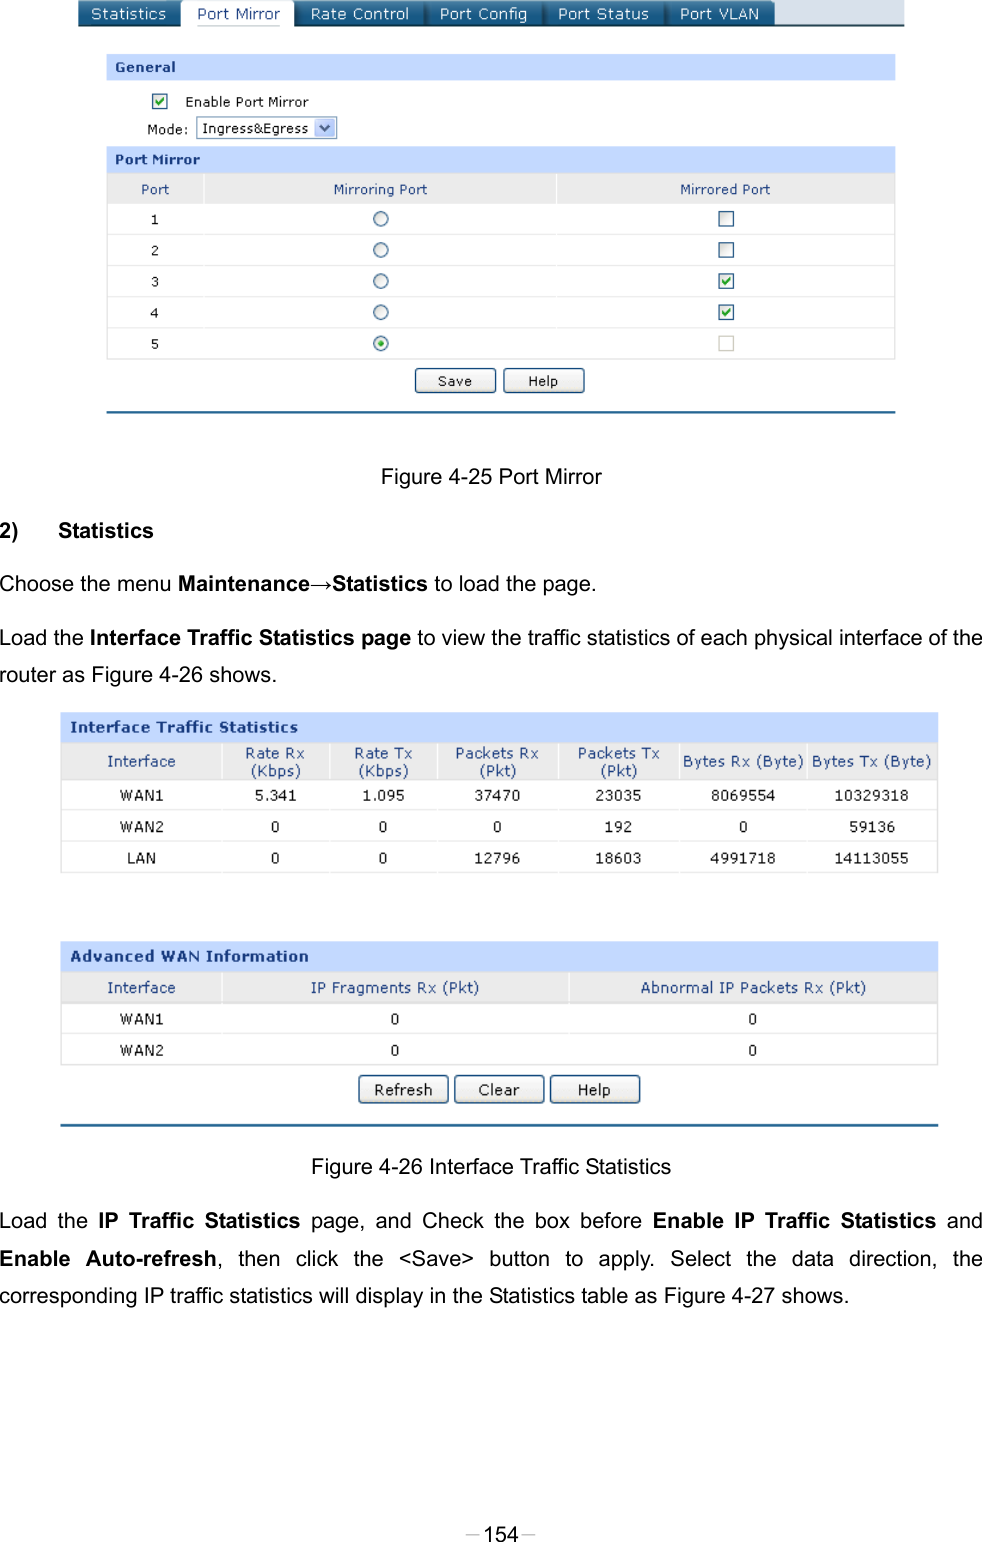   Figure 4-25 Port Mirror 2) Statistics Choose the menu Maintenance→Statistics to load the page. Load the Interface Traffic Statistics page to view the traffic statistics of each physical interface of the router as Figure 4-26 shows.    Figure 4-26 Interface Traffic Statistics Load the IP Traffic Statistics page, and Check the box before Enable IP Traffic Statistics and Enable Auto-refresh, then click the &lt;Save&gt;  button to apply. Select the data direction, the corresponding IP traffic statistics will display in the Statistics table as Figure 4-27 shows.   -154- 